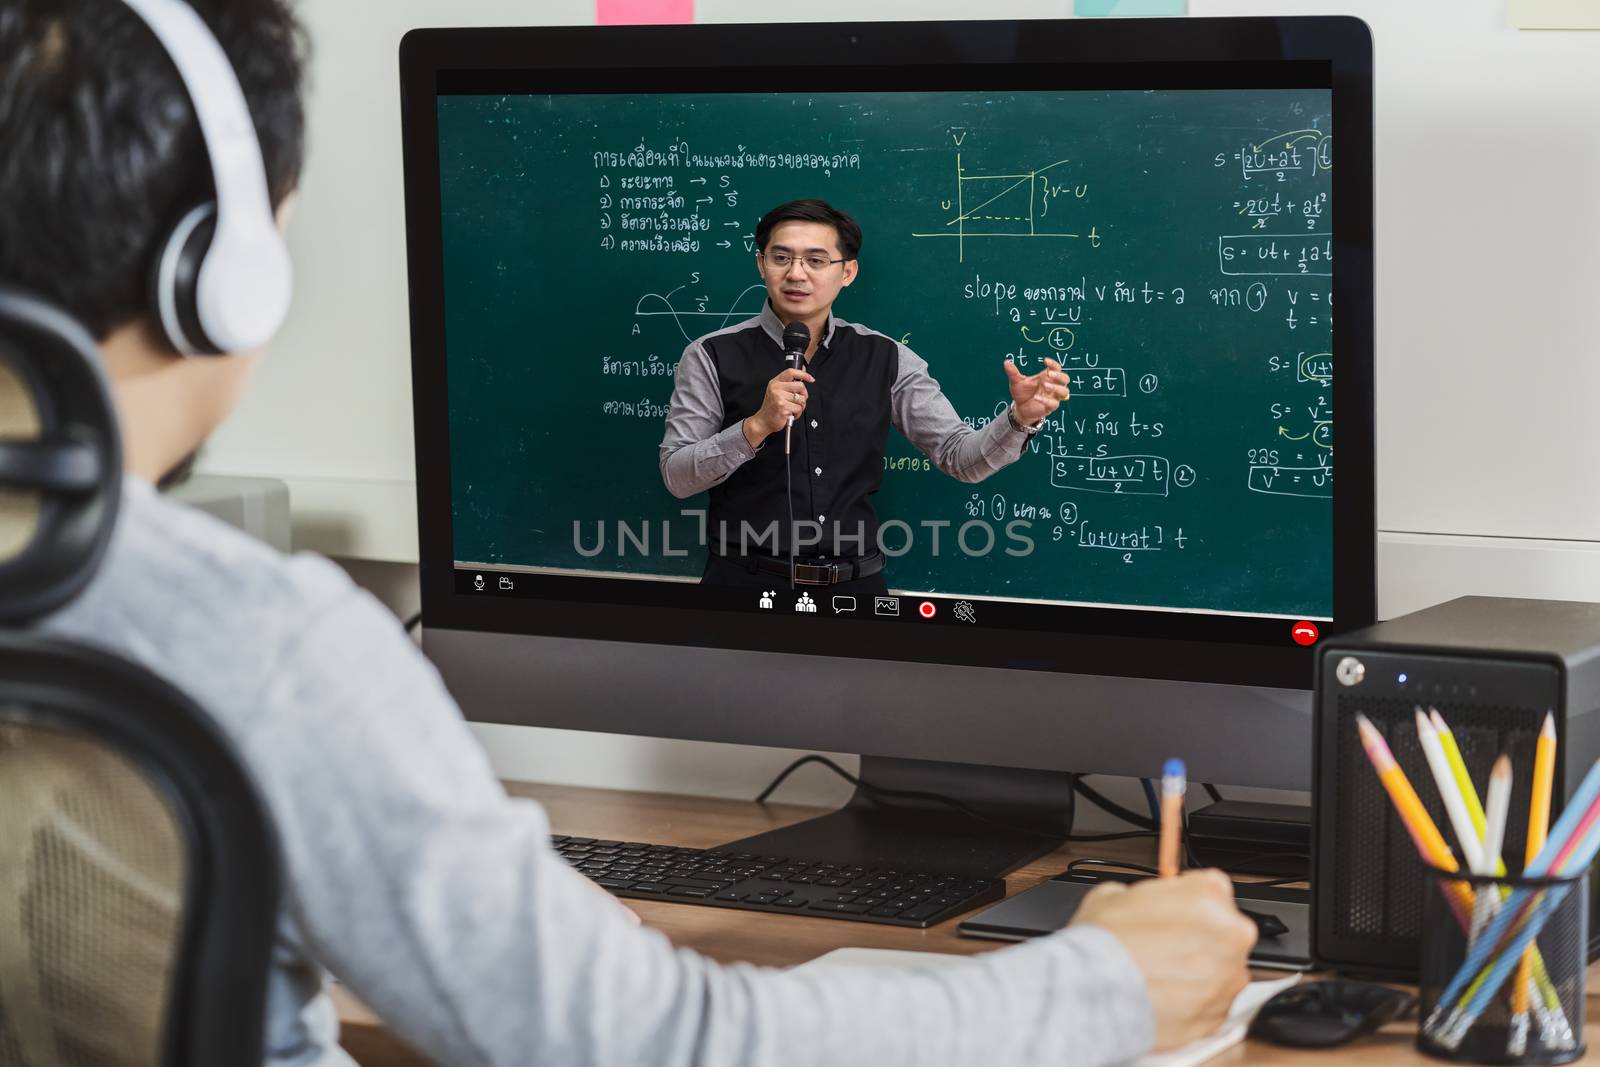 Rear View of Asian student learning with teacher over the physics formular in thai laguage on black board via video call conference when Covid-19 pandemic, education and Social distancing concept